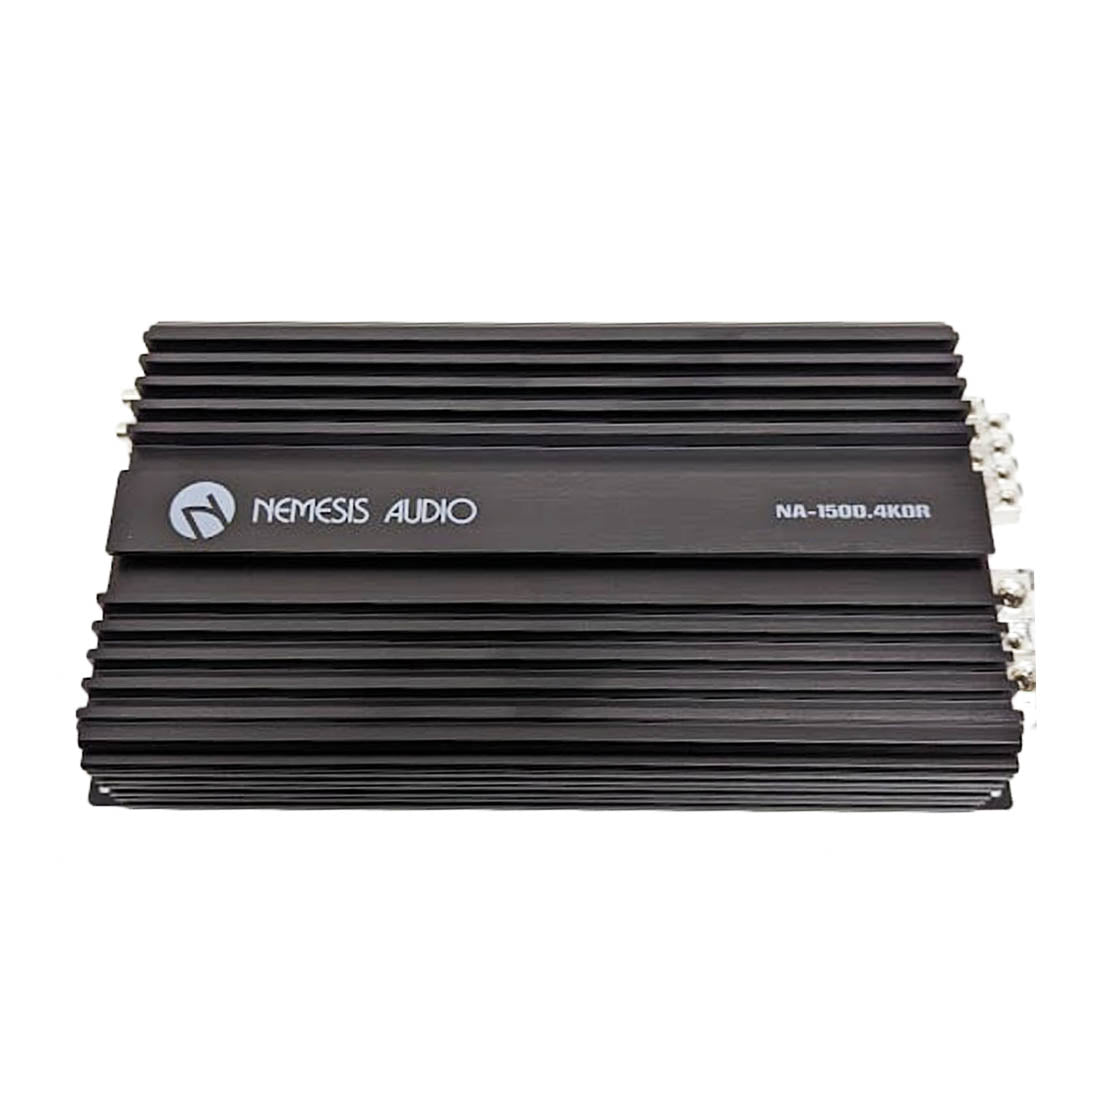 Nemesis Audio NA-1500.4KOR 1500W RMS 4-Channel Car Stereo Amplifier